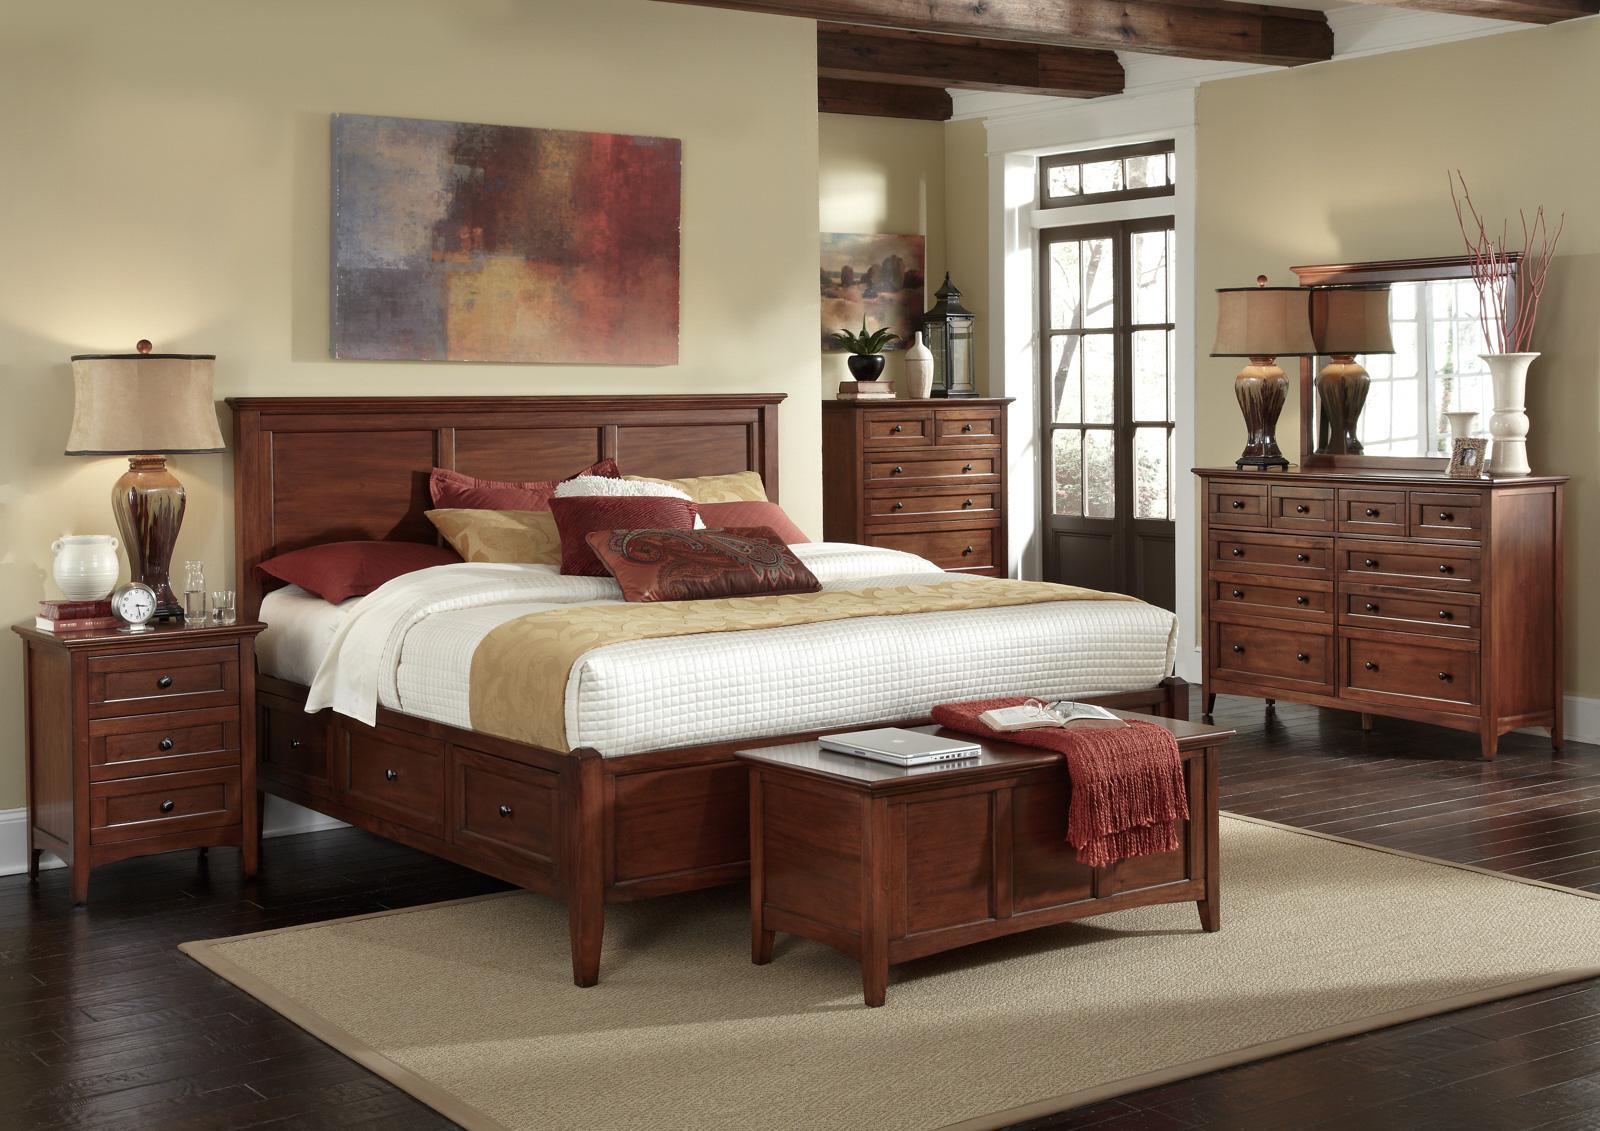 

    
Traditional Queen Storage Bedroom Set 6Pcs WSLCB5091 A-America Westlake
